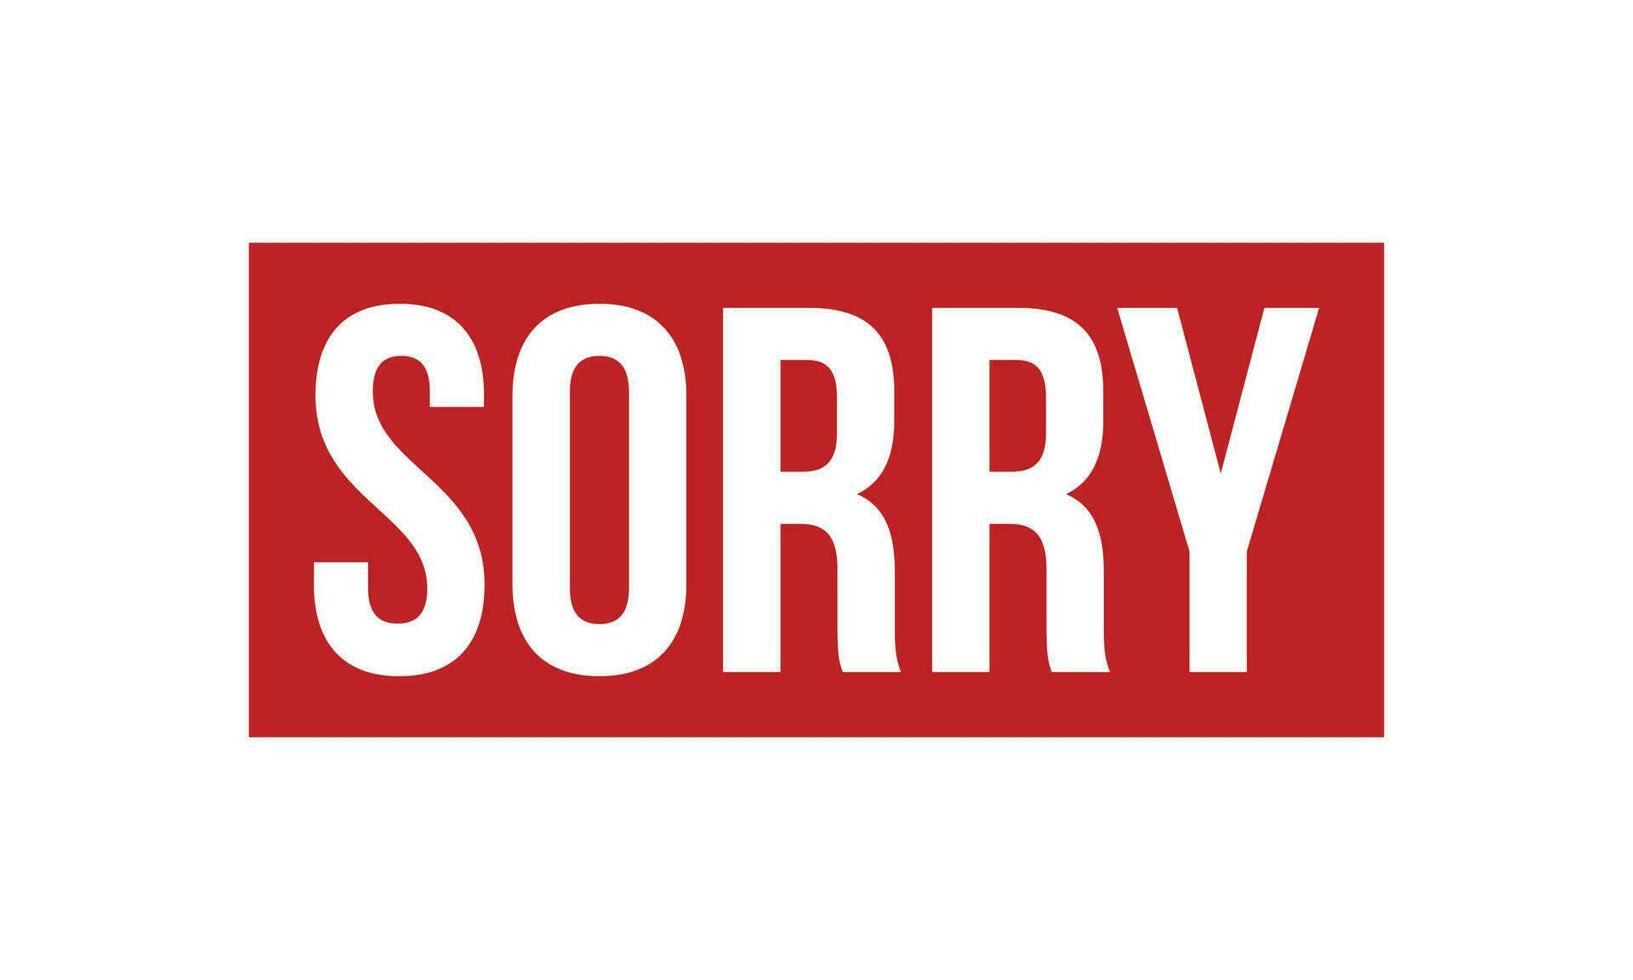 Sorry Rubber Stamp Seal Vector